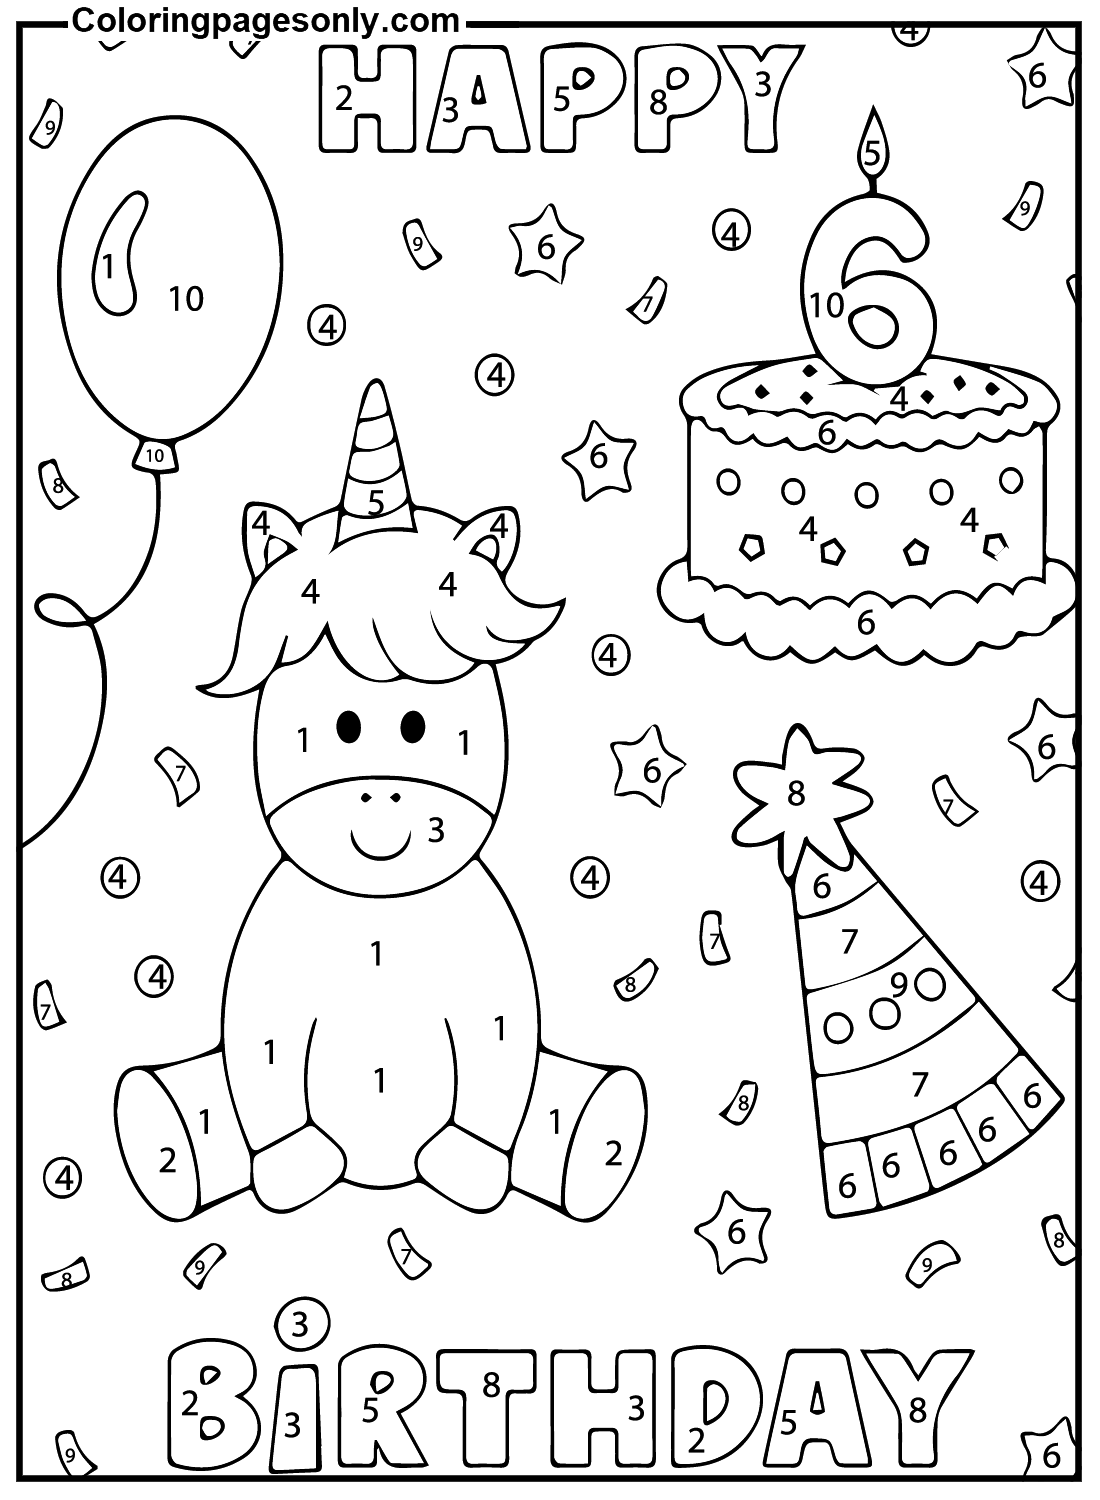 Free Color By Number Unicorn Coloring Pages